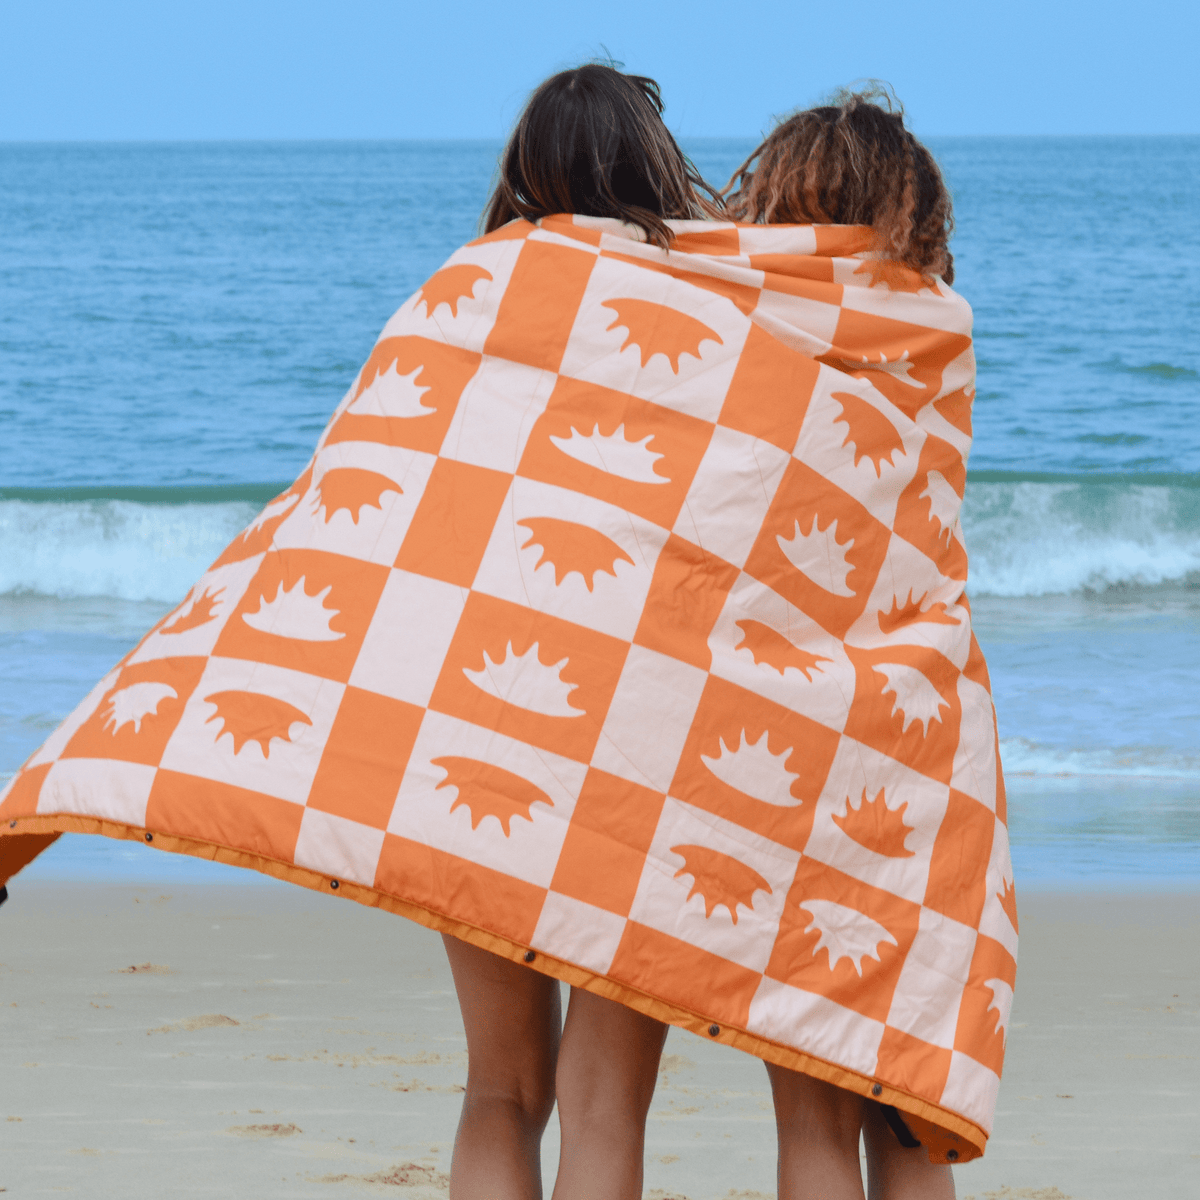 VOITED Compact Picnic & Beach Blanket - Concha